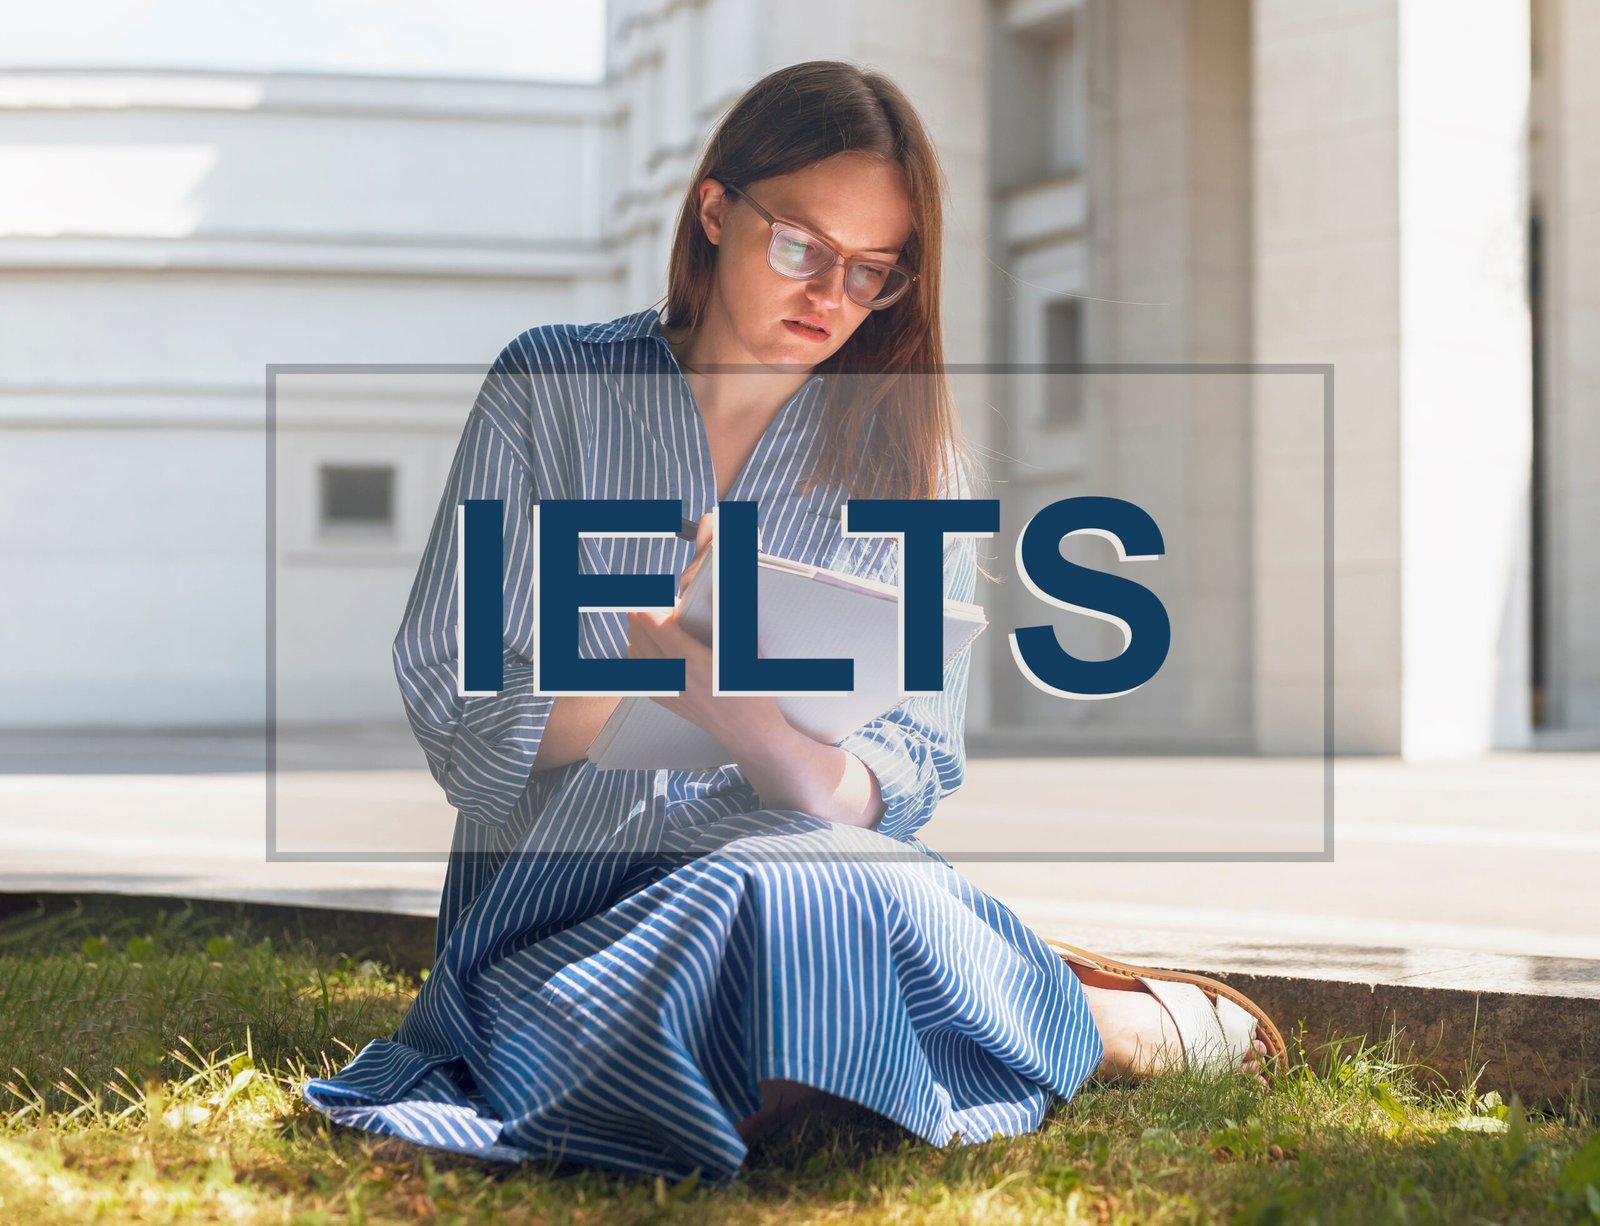 The road to success: IELTS as a gateway to International Education